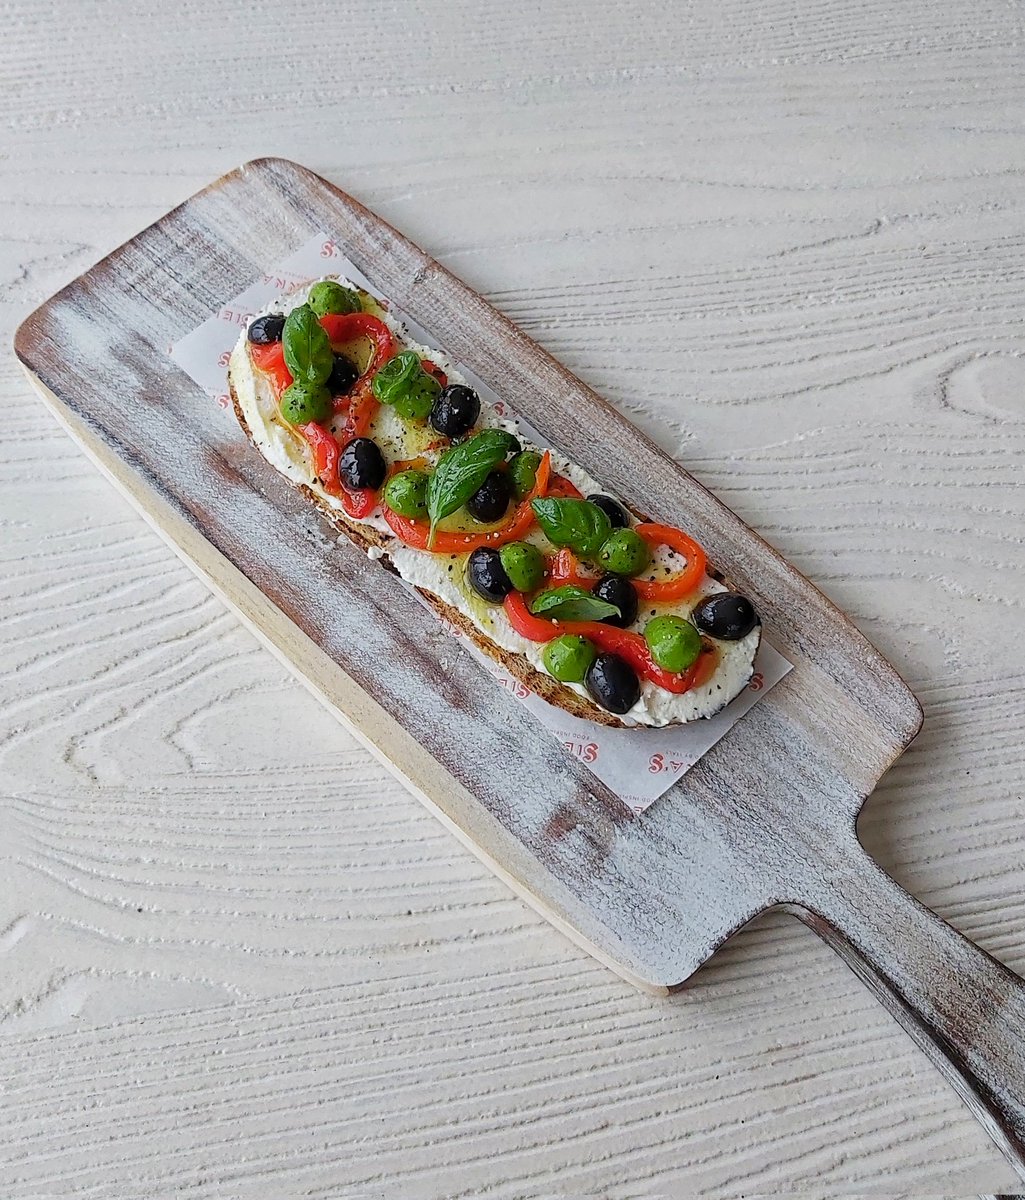 Ardsallagh goats cheese mousse and sourdough crostini, roasted red pepper agro dolce, black olives, basil puree. A delicious new addition to our new menu! Providing very popular amongst our customers